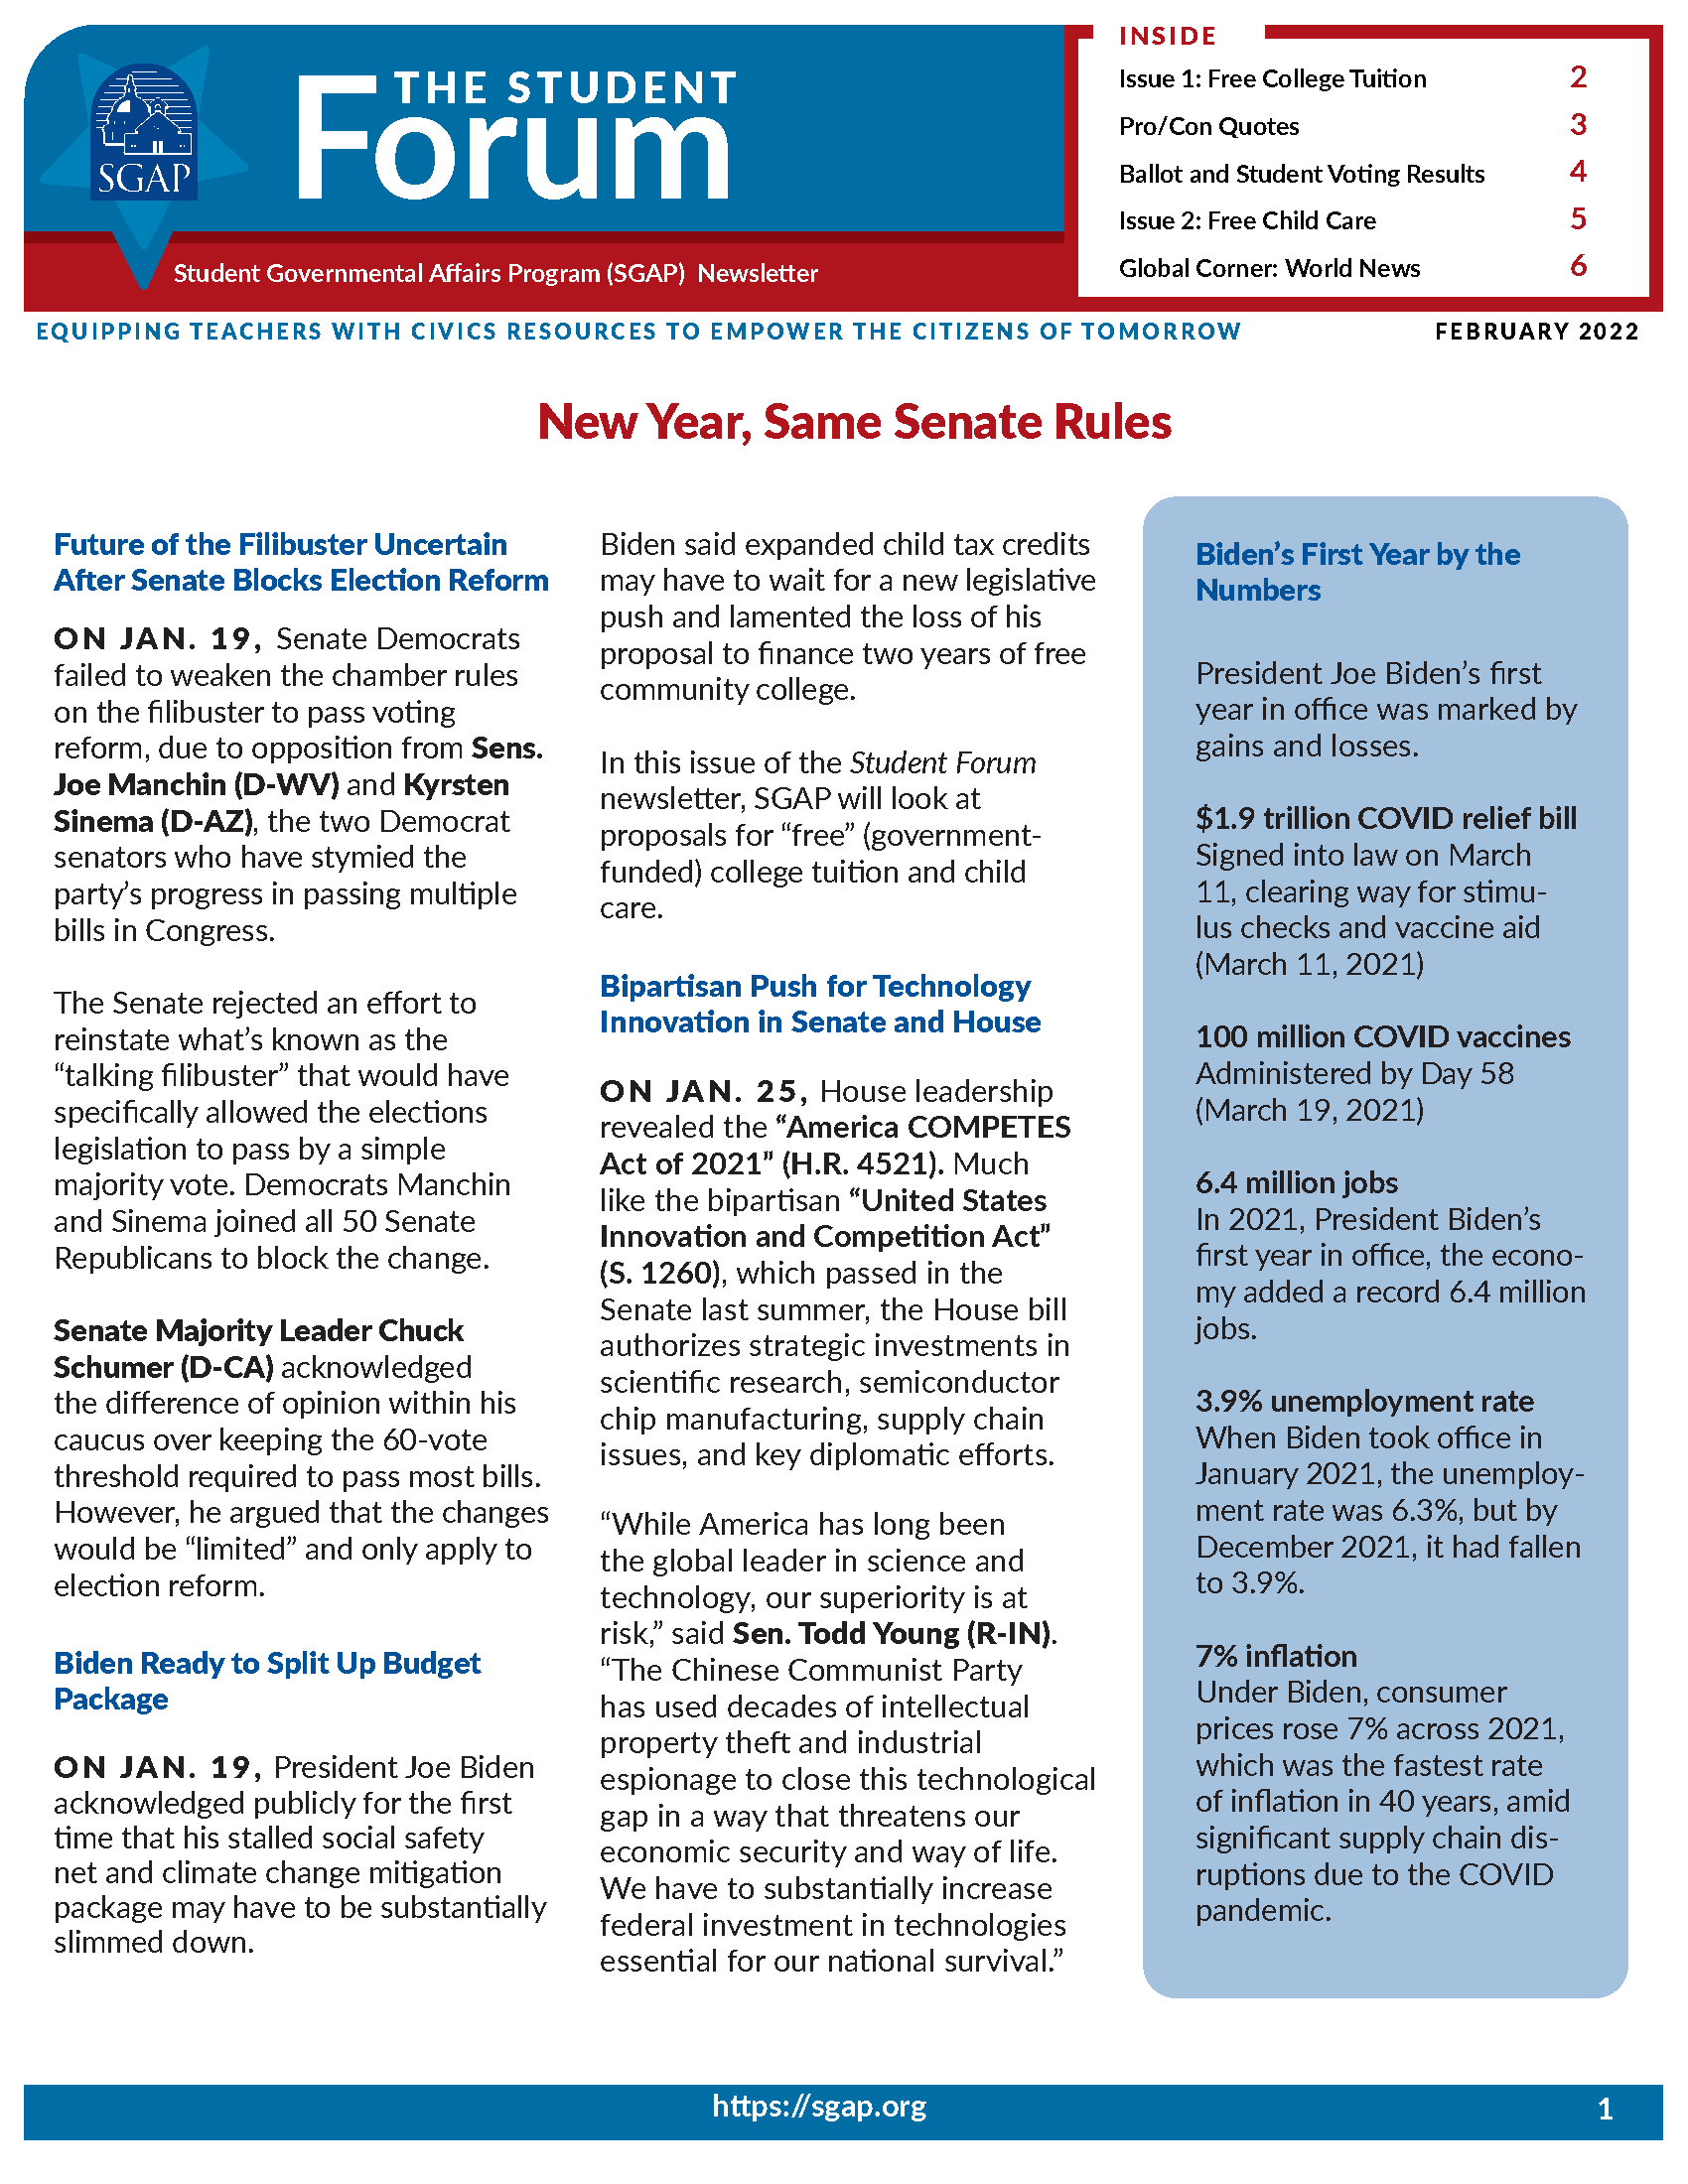 SGAP Newsletter for February 2022 (Free College & Free Child Care)